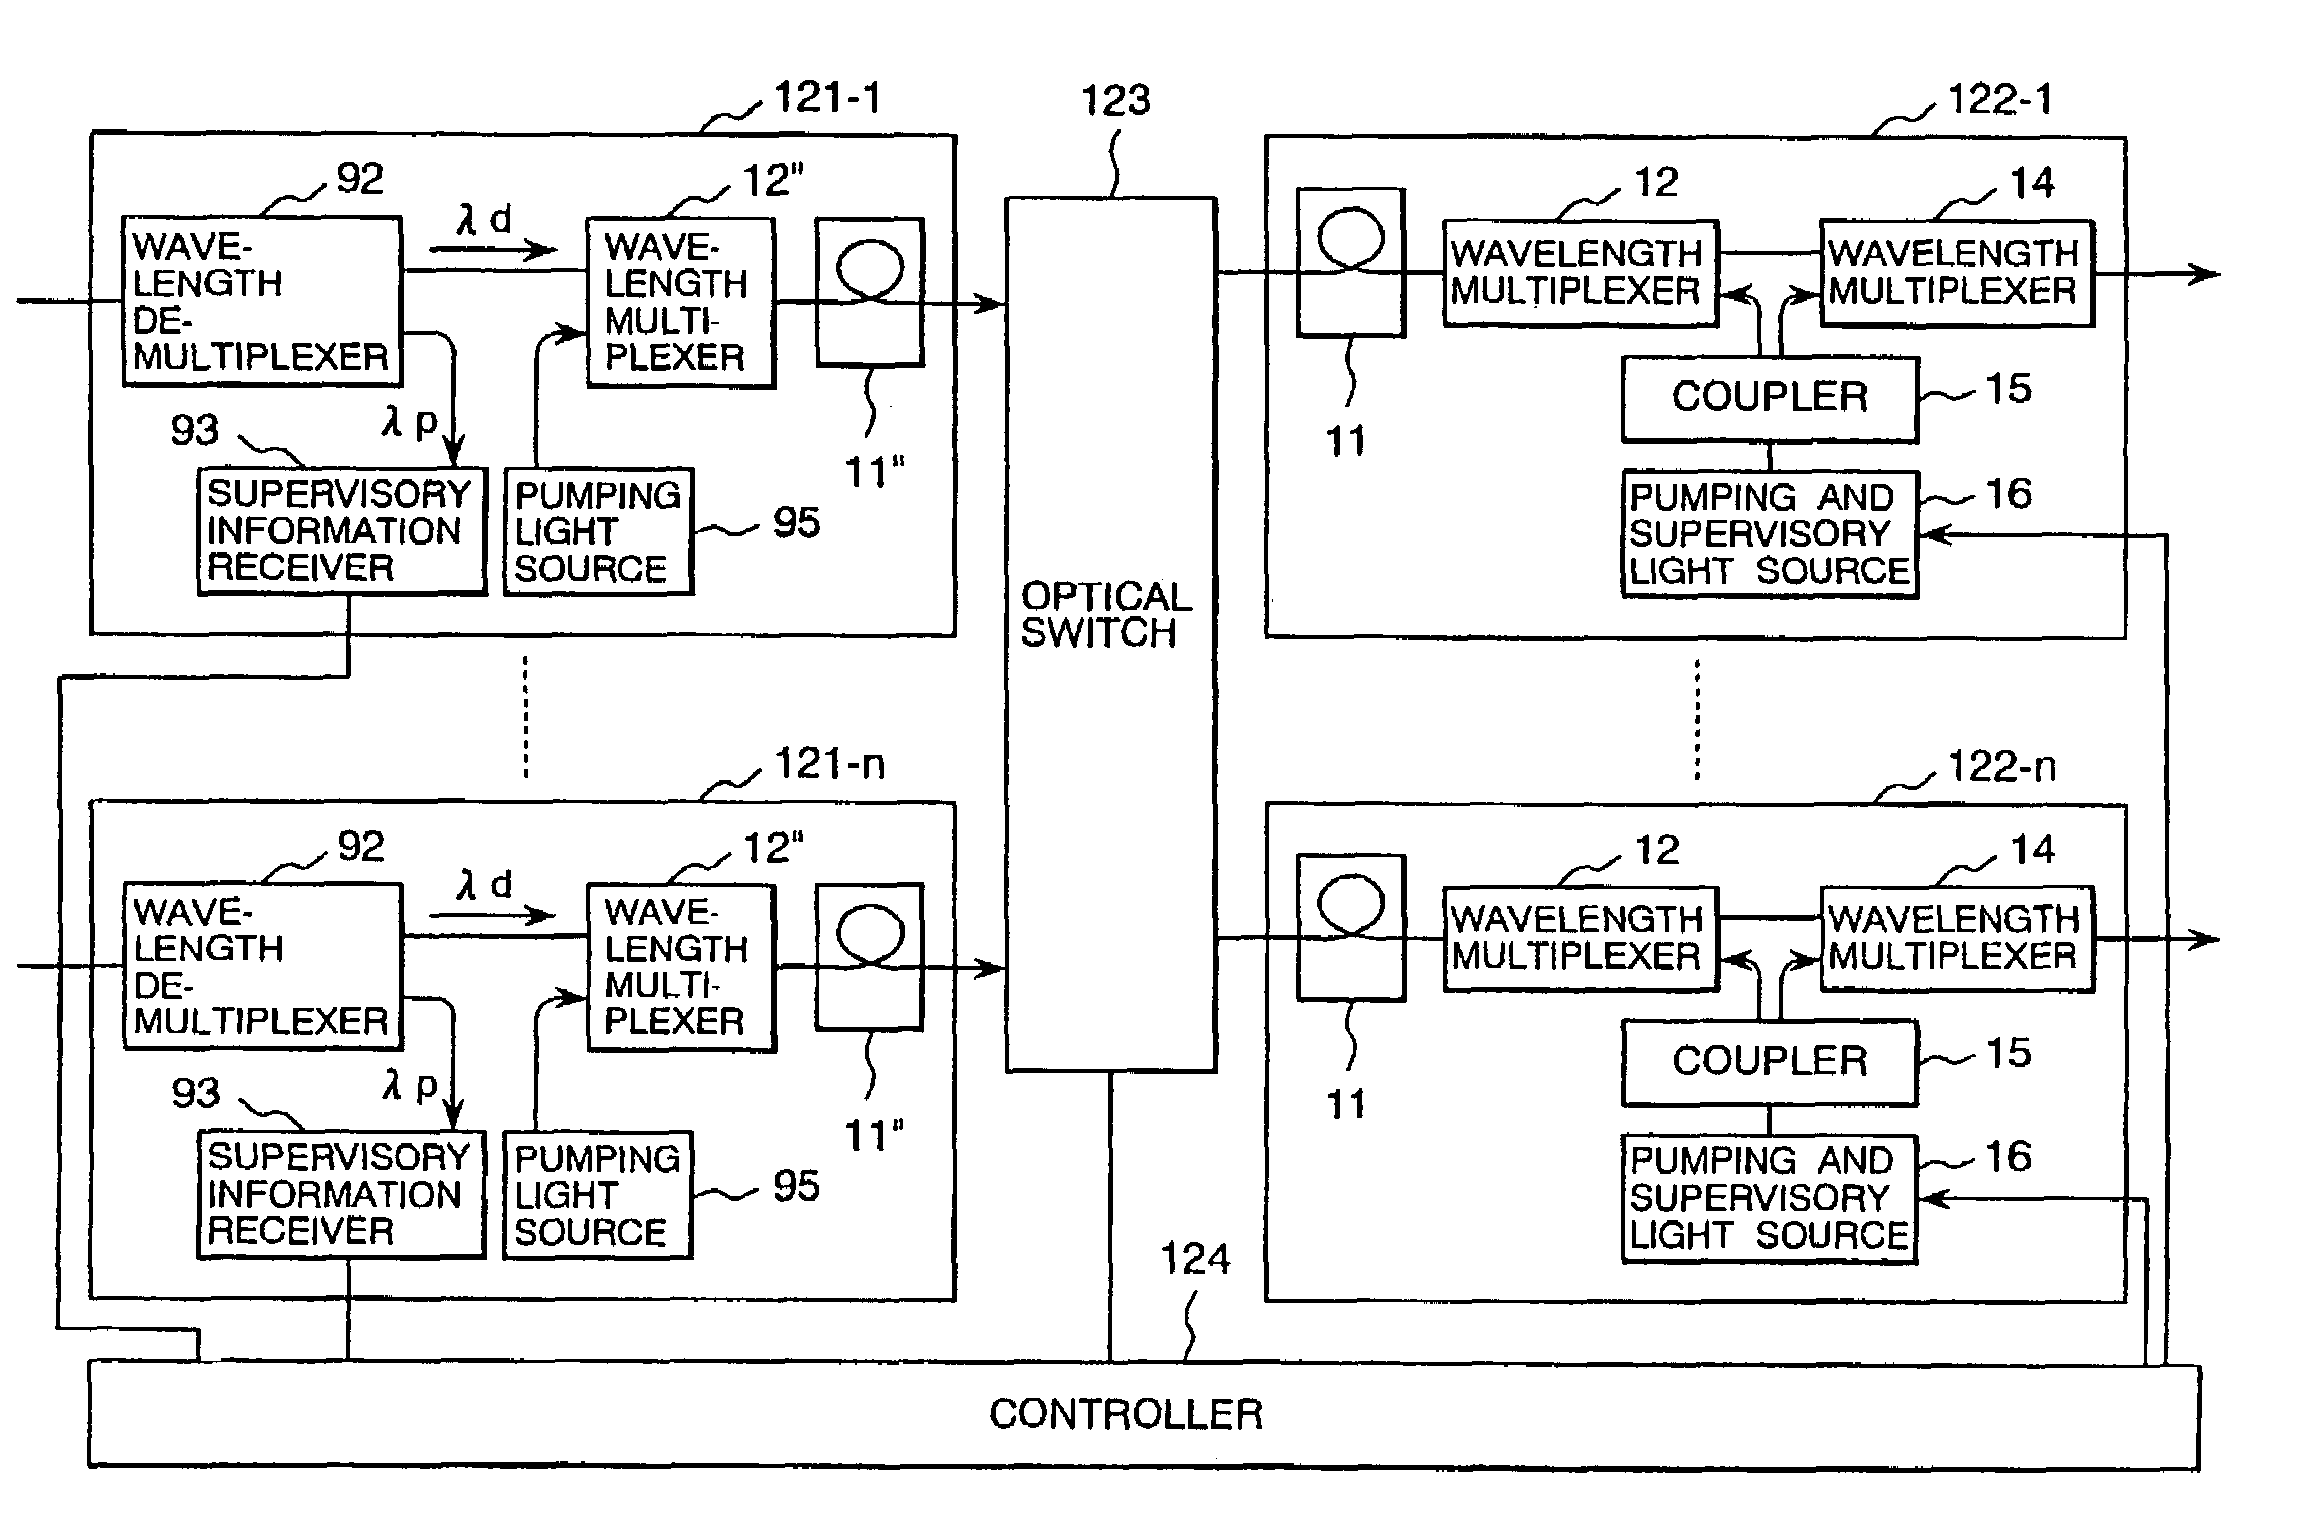 Optical transmission apparatus and optical systems